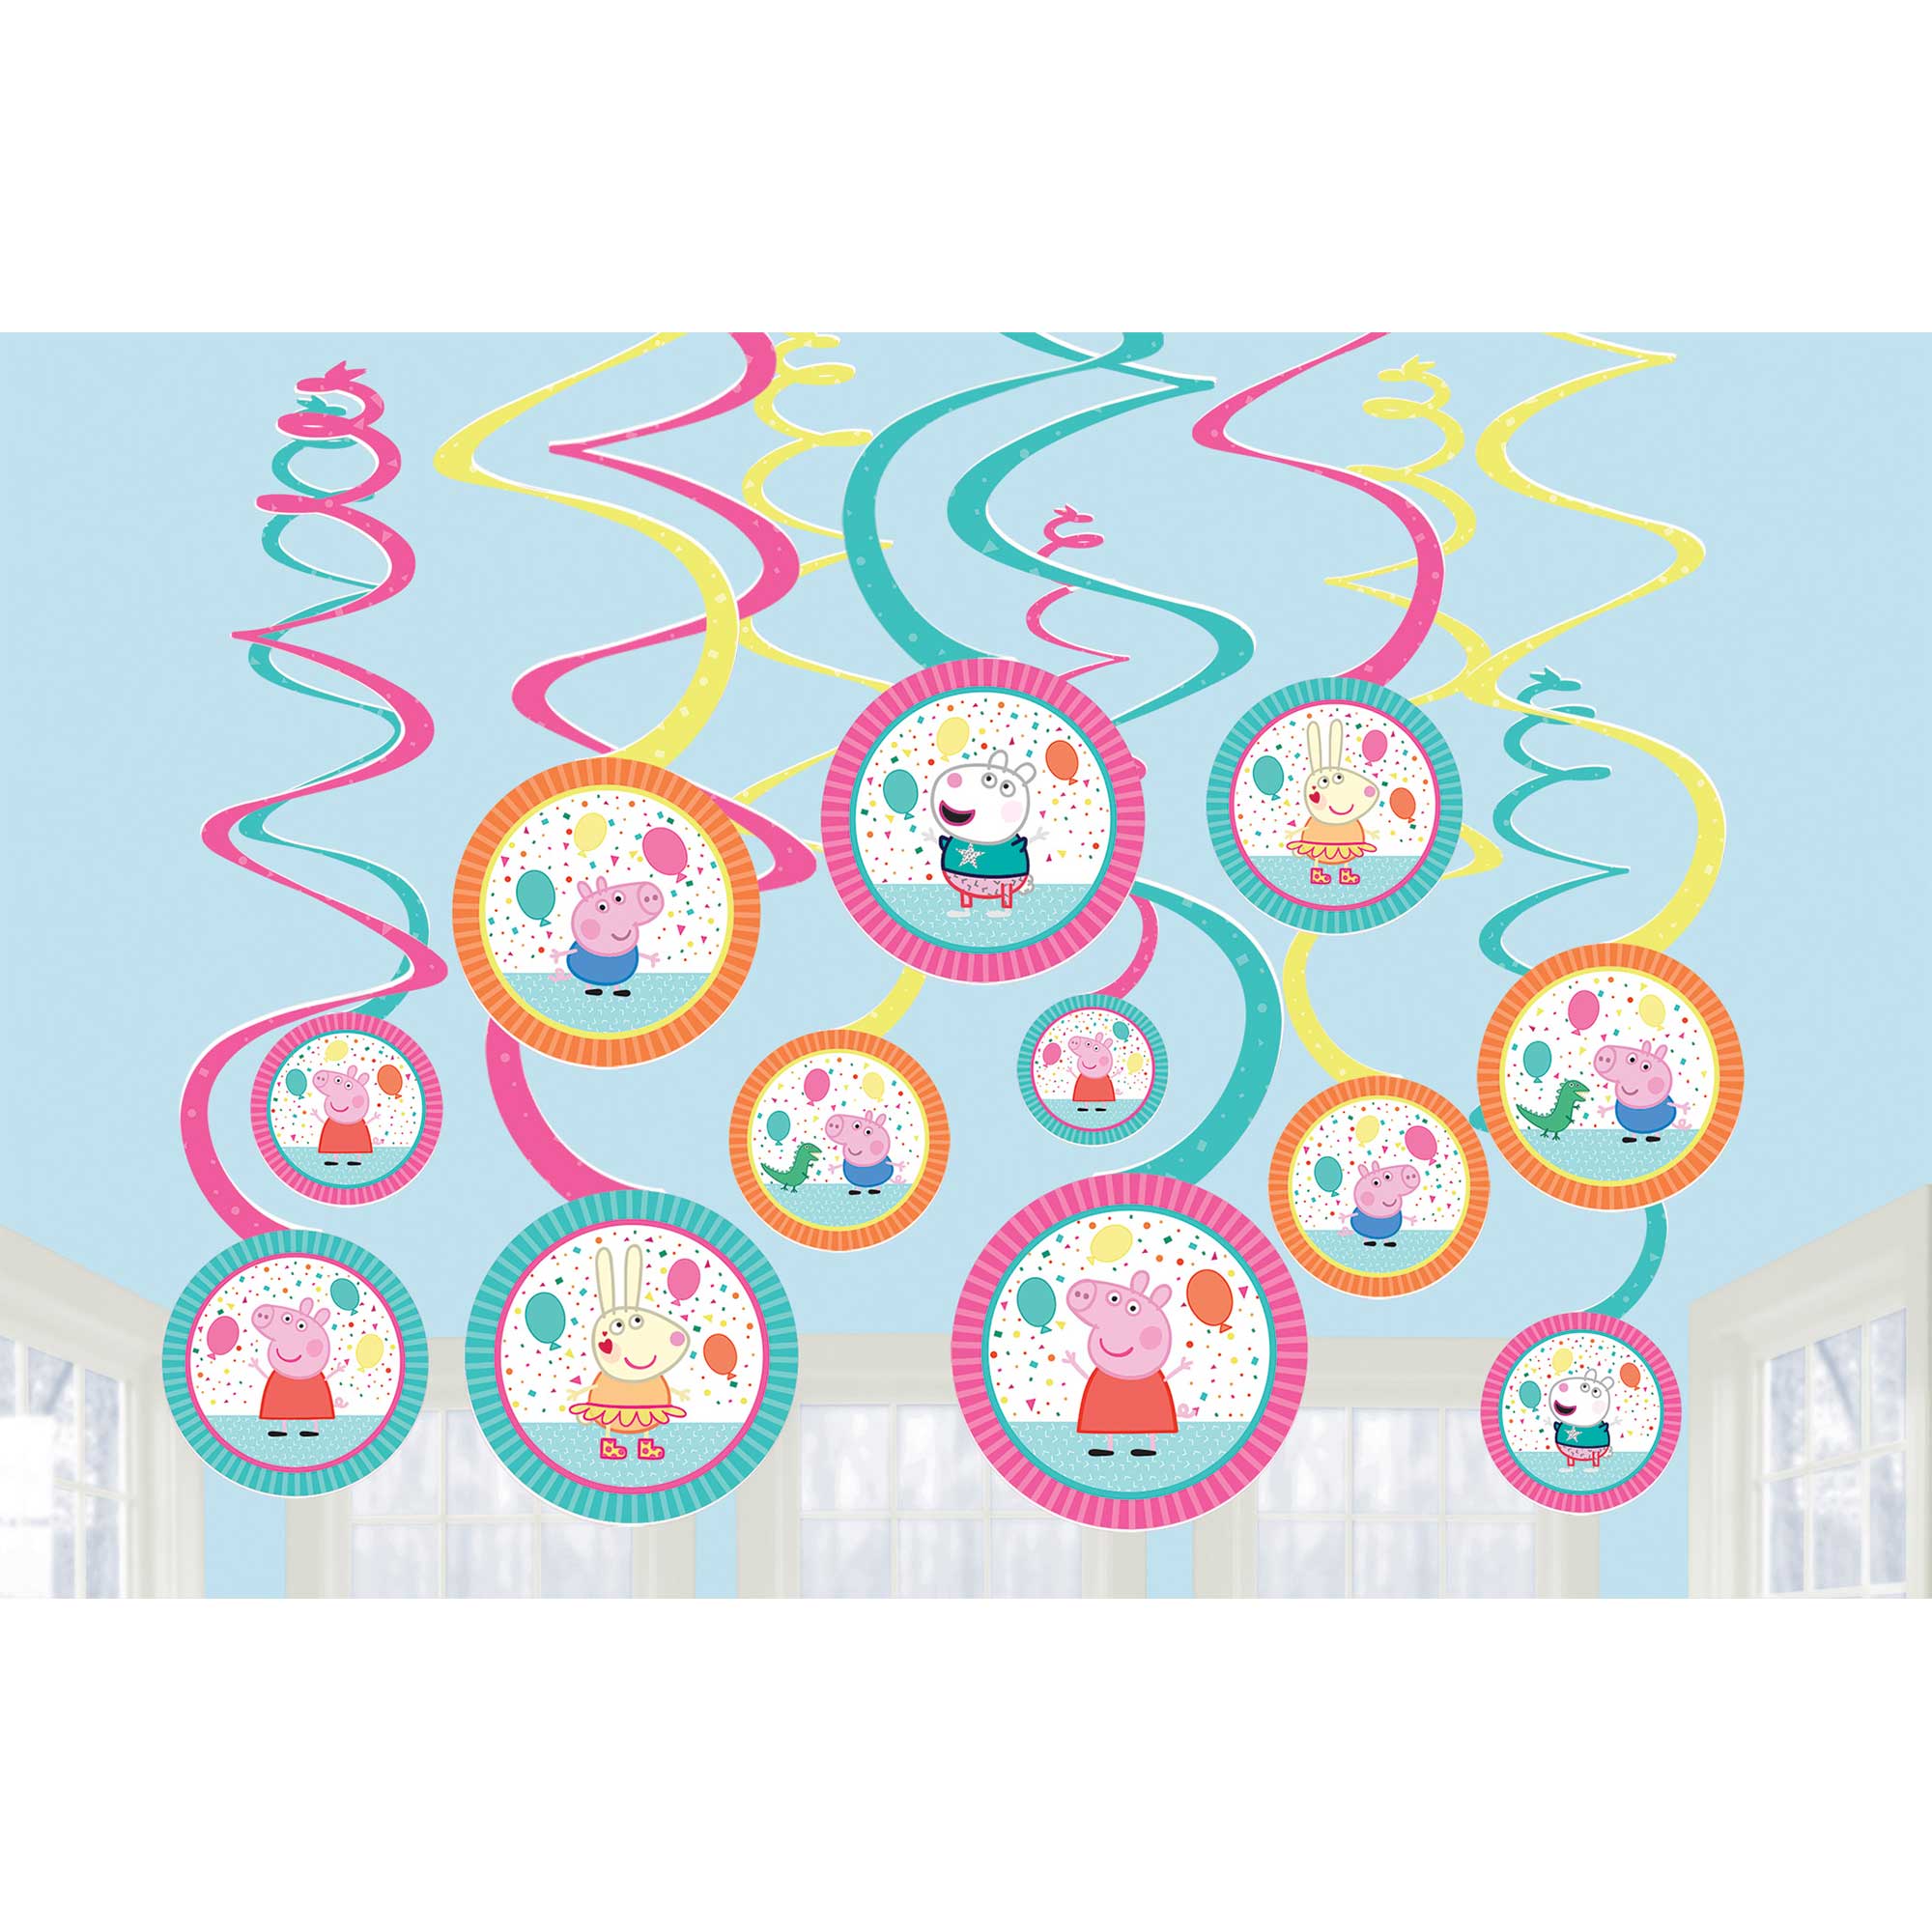 Peppa Pig Confetti Party Spiral Swirls Hanging Decorations - 12 Pack Default Title